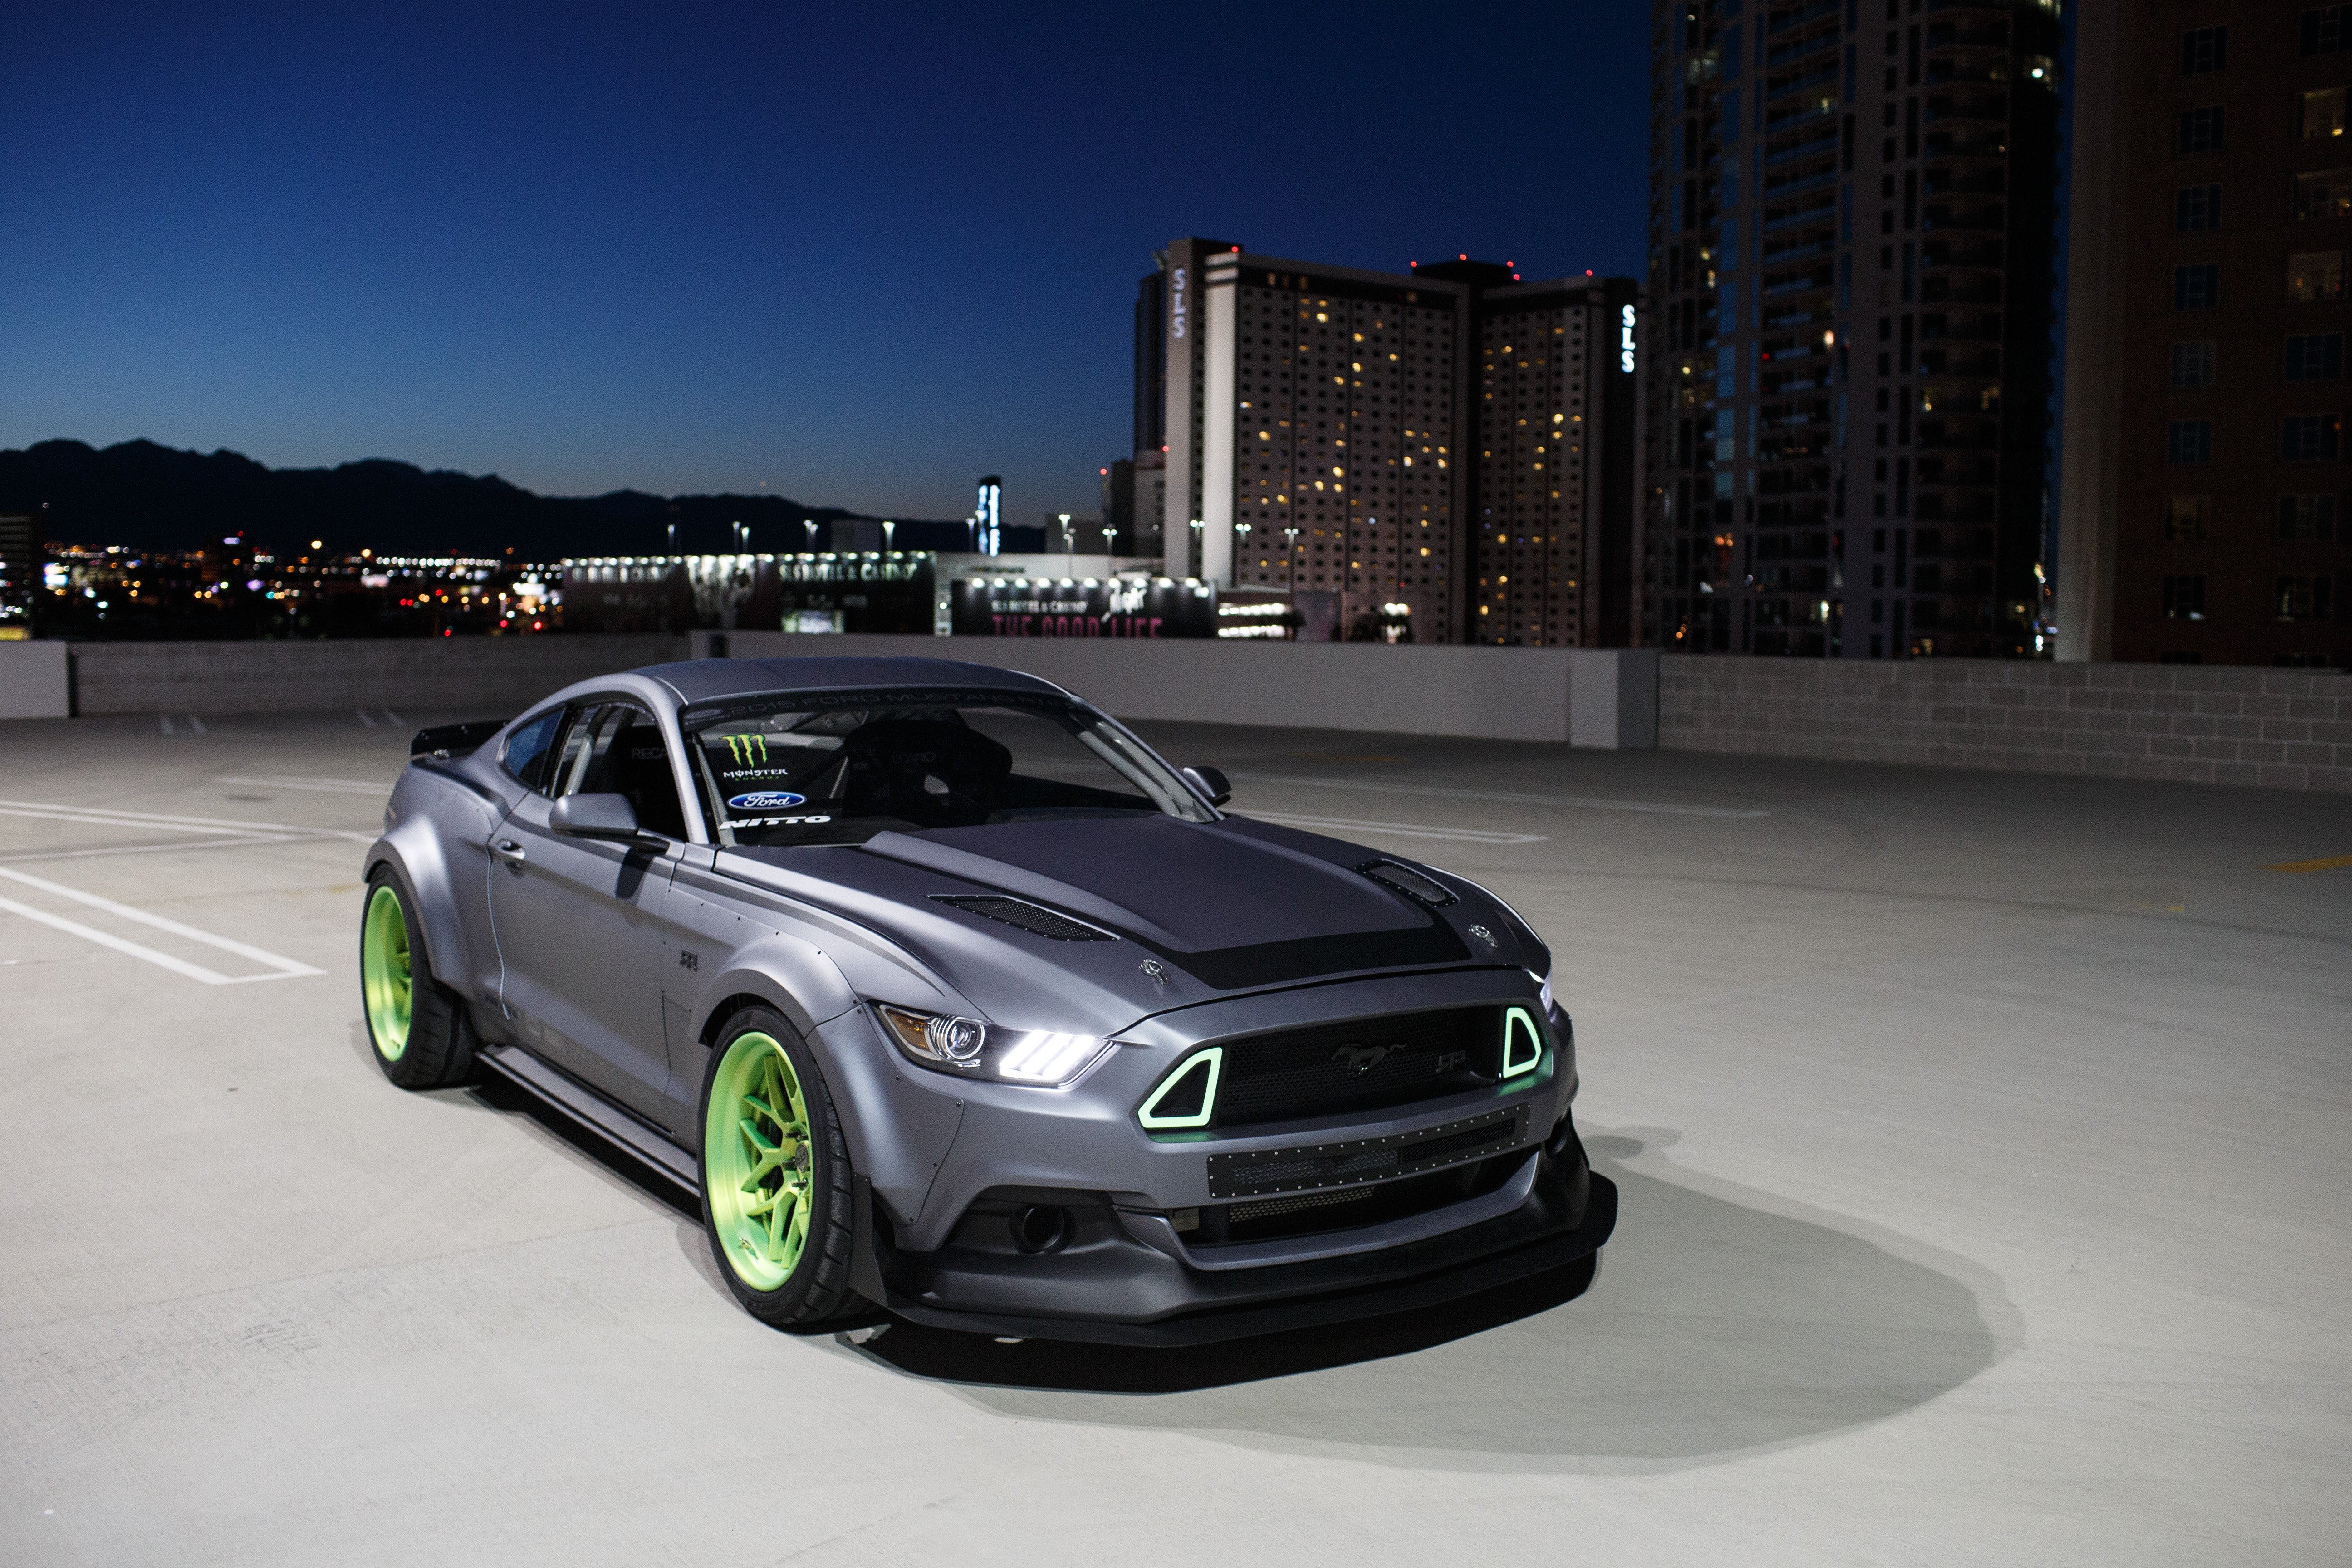 2015, Ford, Mustang, Rtr, Muscle, Tuning, Hot, Rod, Rods, Drift, Race, Racing Wallpaper